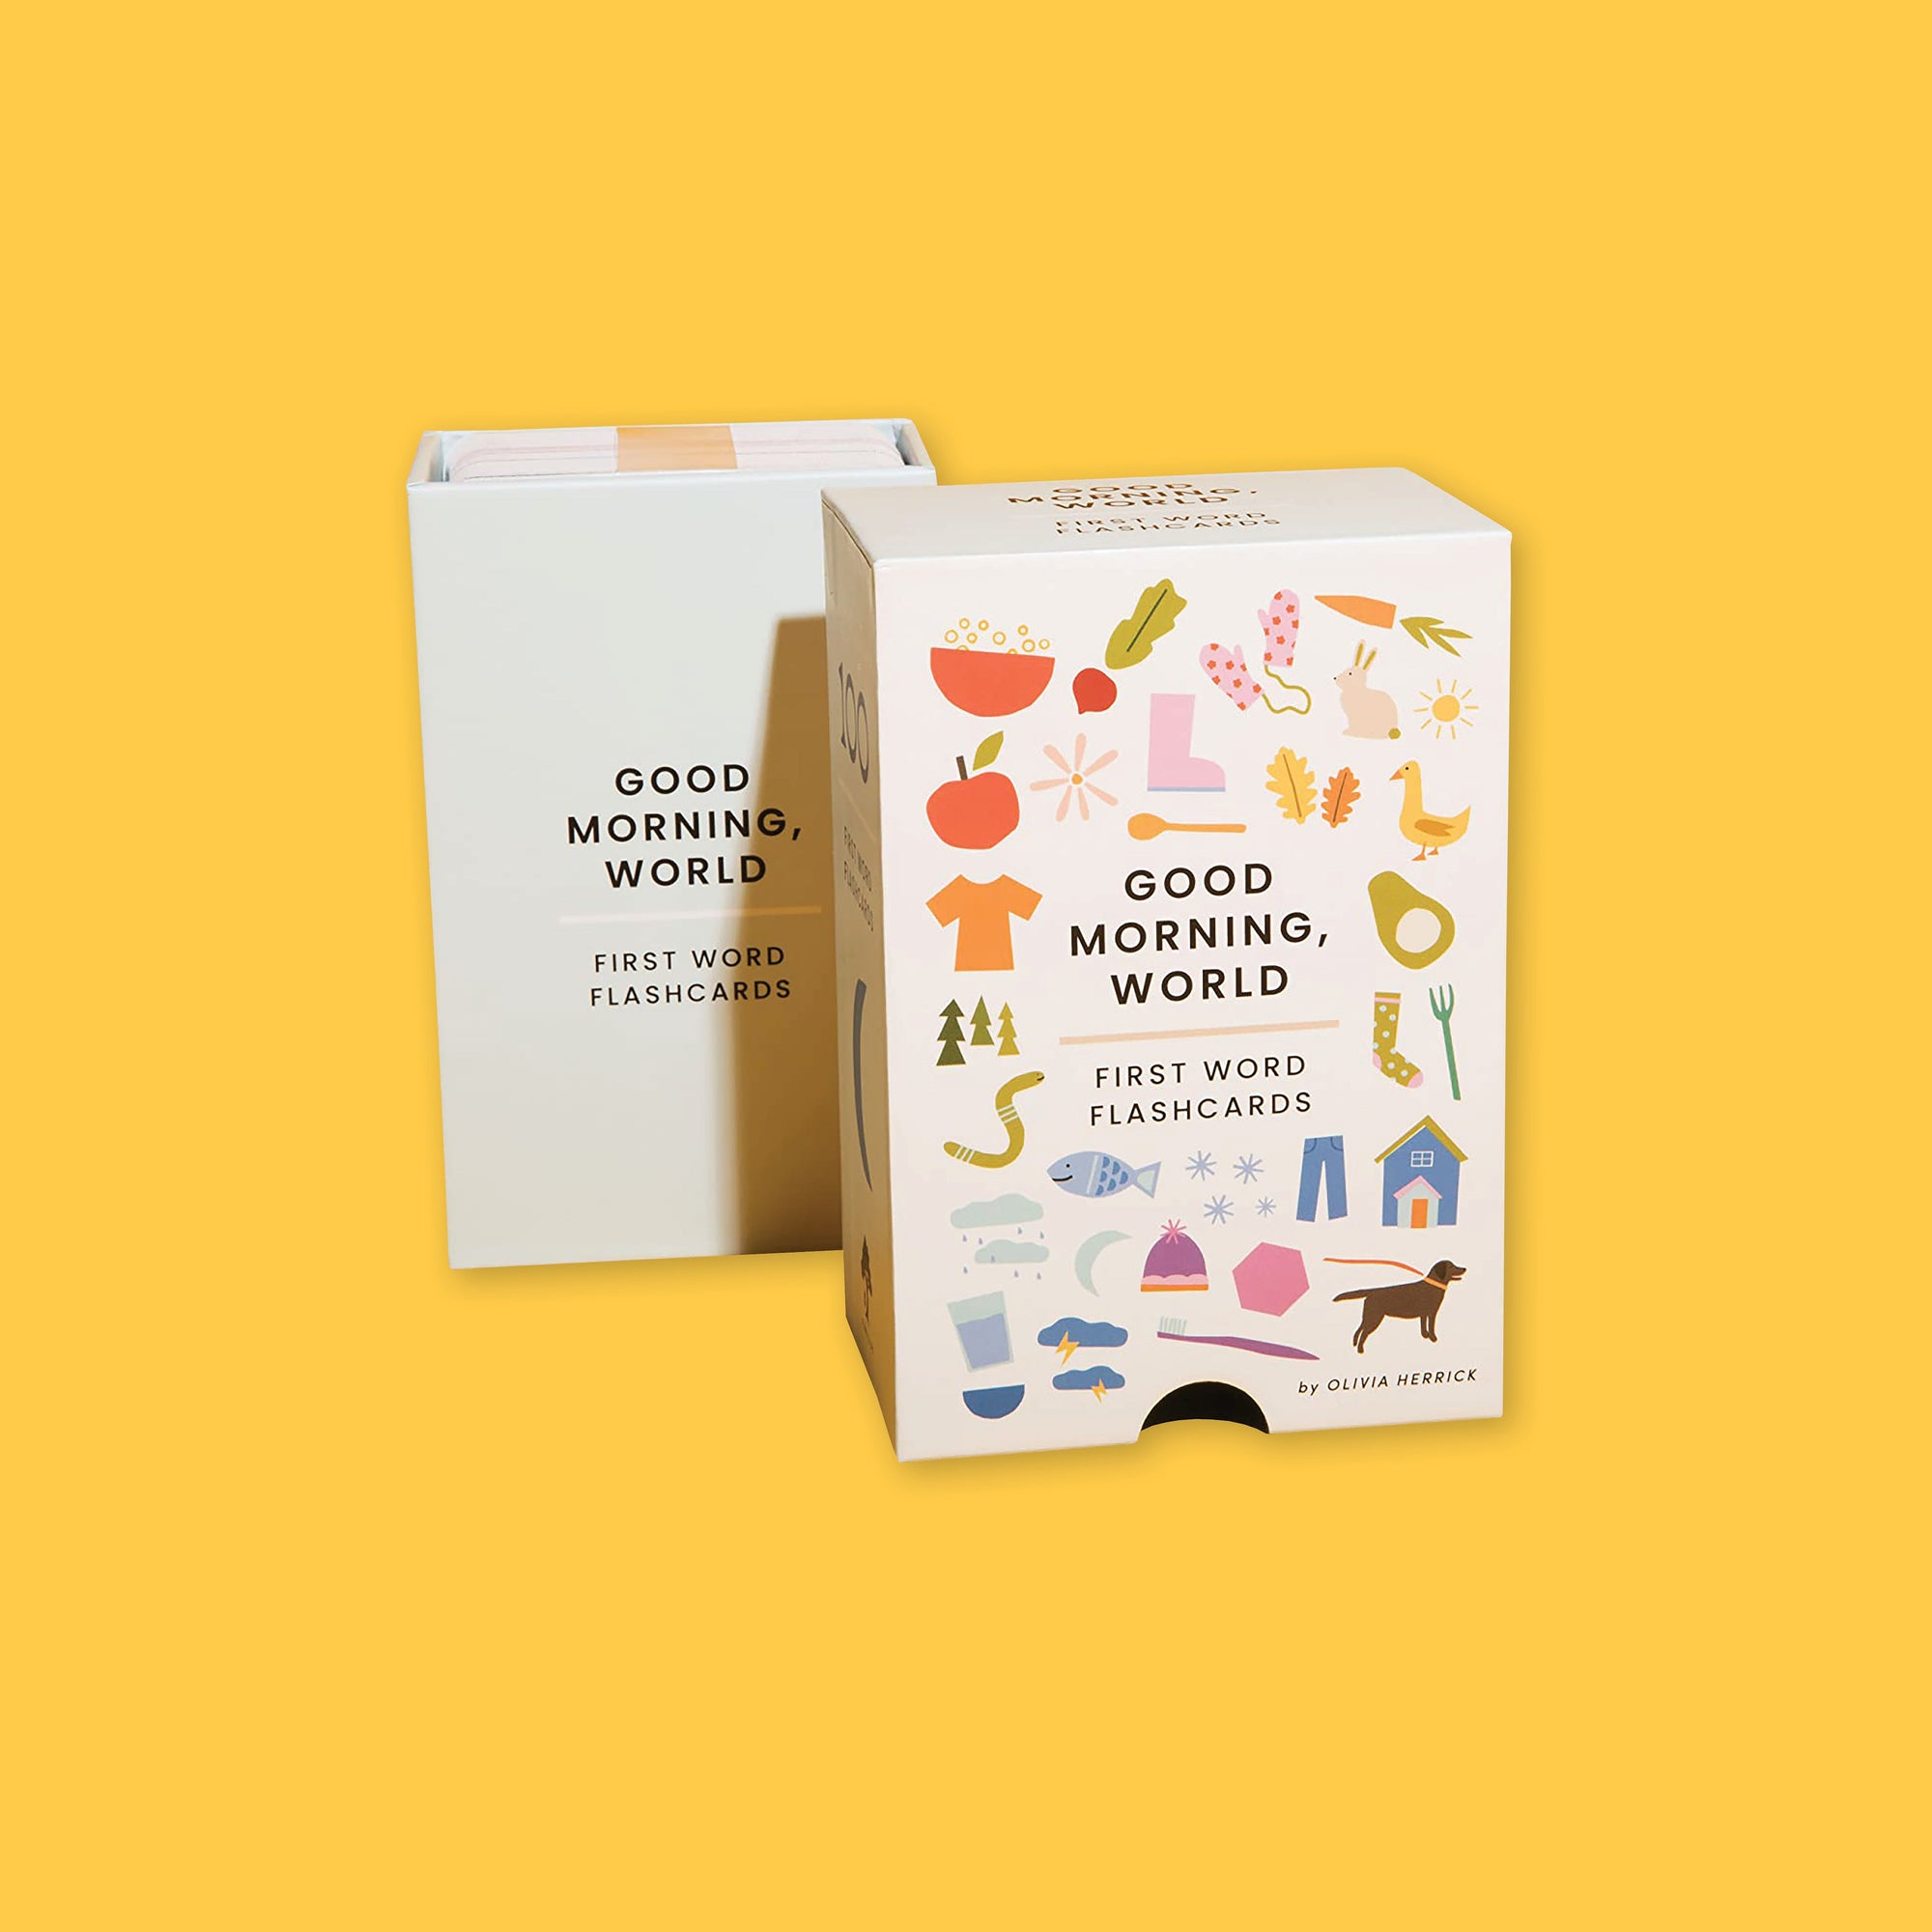 On a sunny mustard background sits a white box with a pack of 100 flash cards in a white, insert box. It says "GOOD MORNING, WORLD," and "FIRST WORD FLASHCARDS" with modern illustrations around the package. There are colorful illustrations of an apple, popcorn, radish, boots, mittens, carrot, rabbit, sun, goose, pear, socks, fork, house, pants, dog, toothbrush, hat, snow, moon, clouds with rain and lighting, glass of water, worm, trees, and a shirt. 